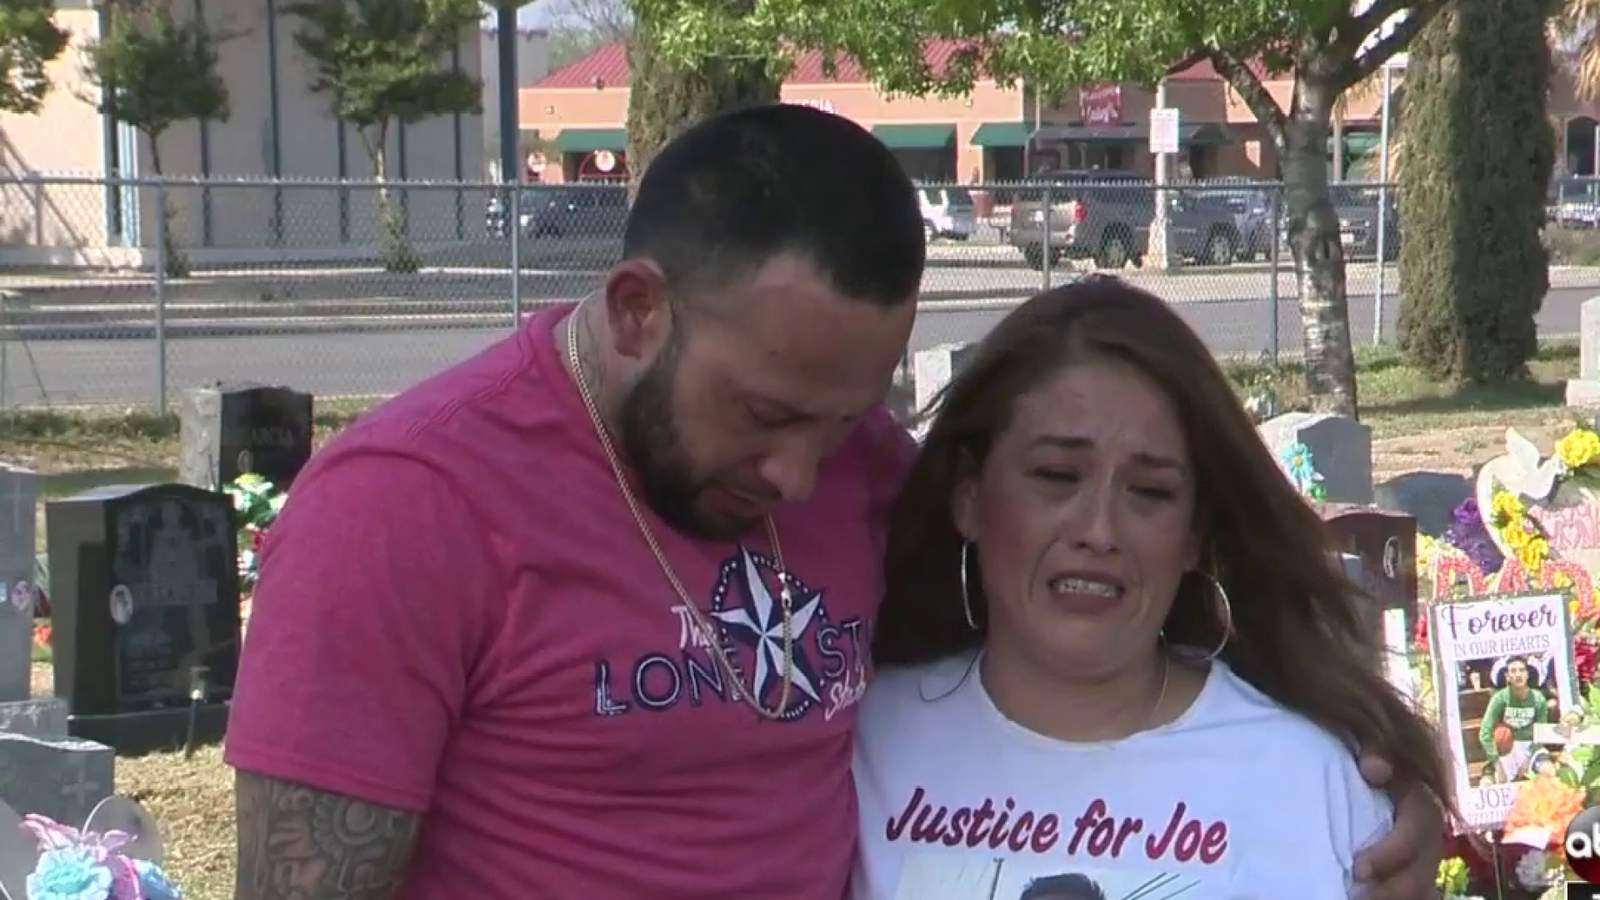 San Antonio mother continues to seek answers four years after son’s murder